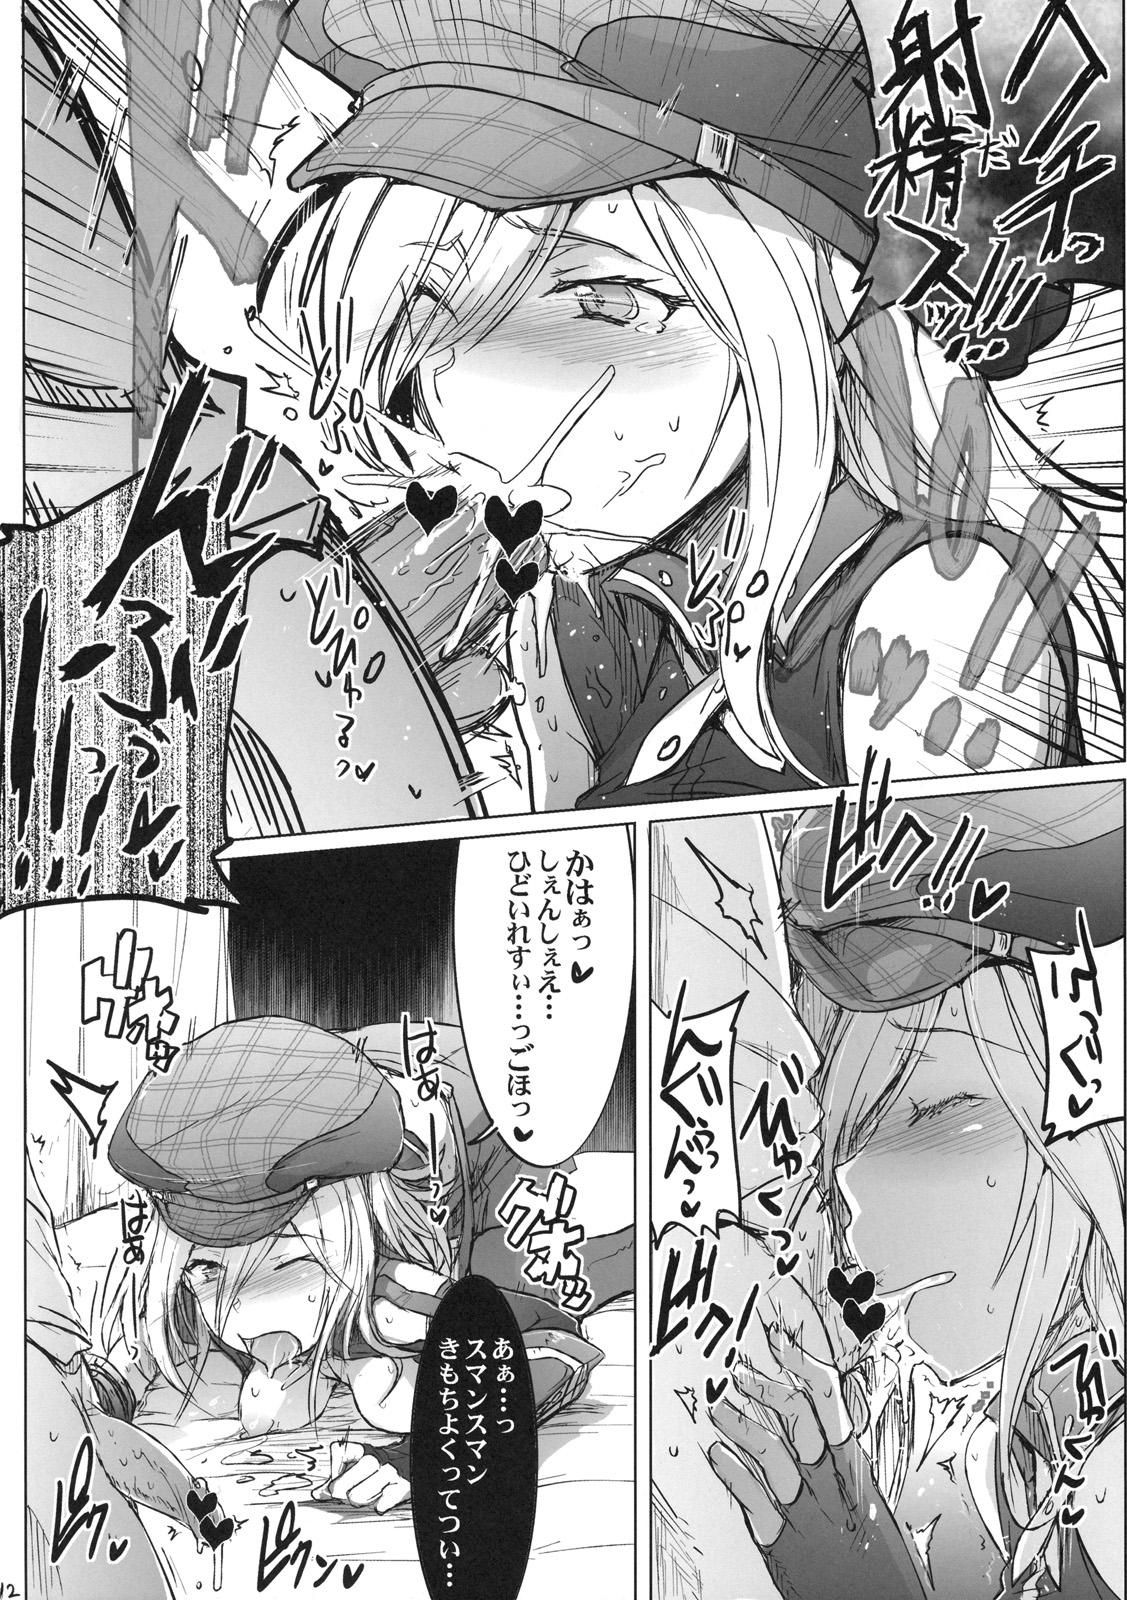 Groupfuck GE Girls - God eater Classic - Page 11